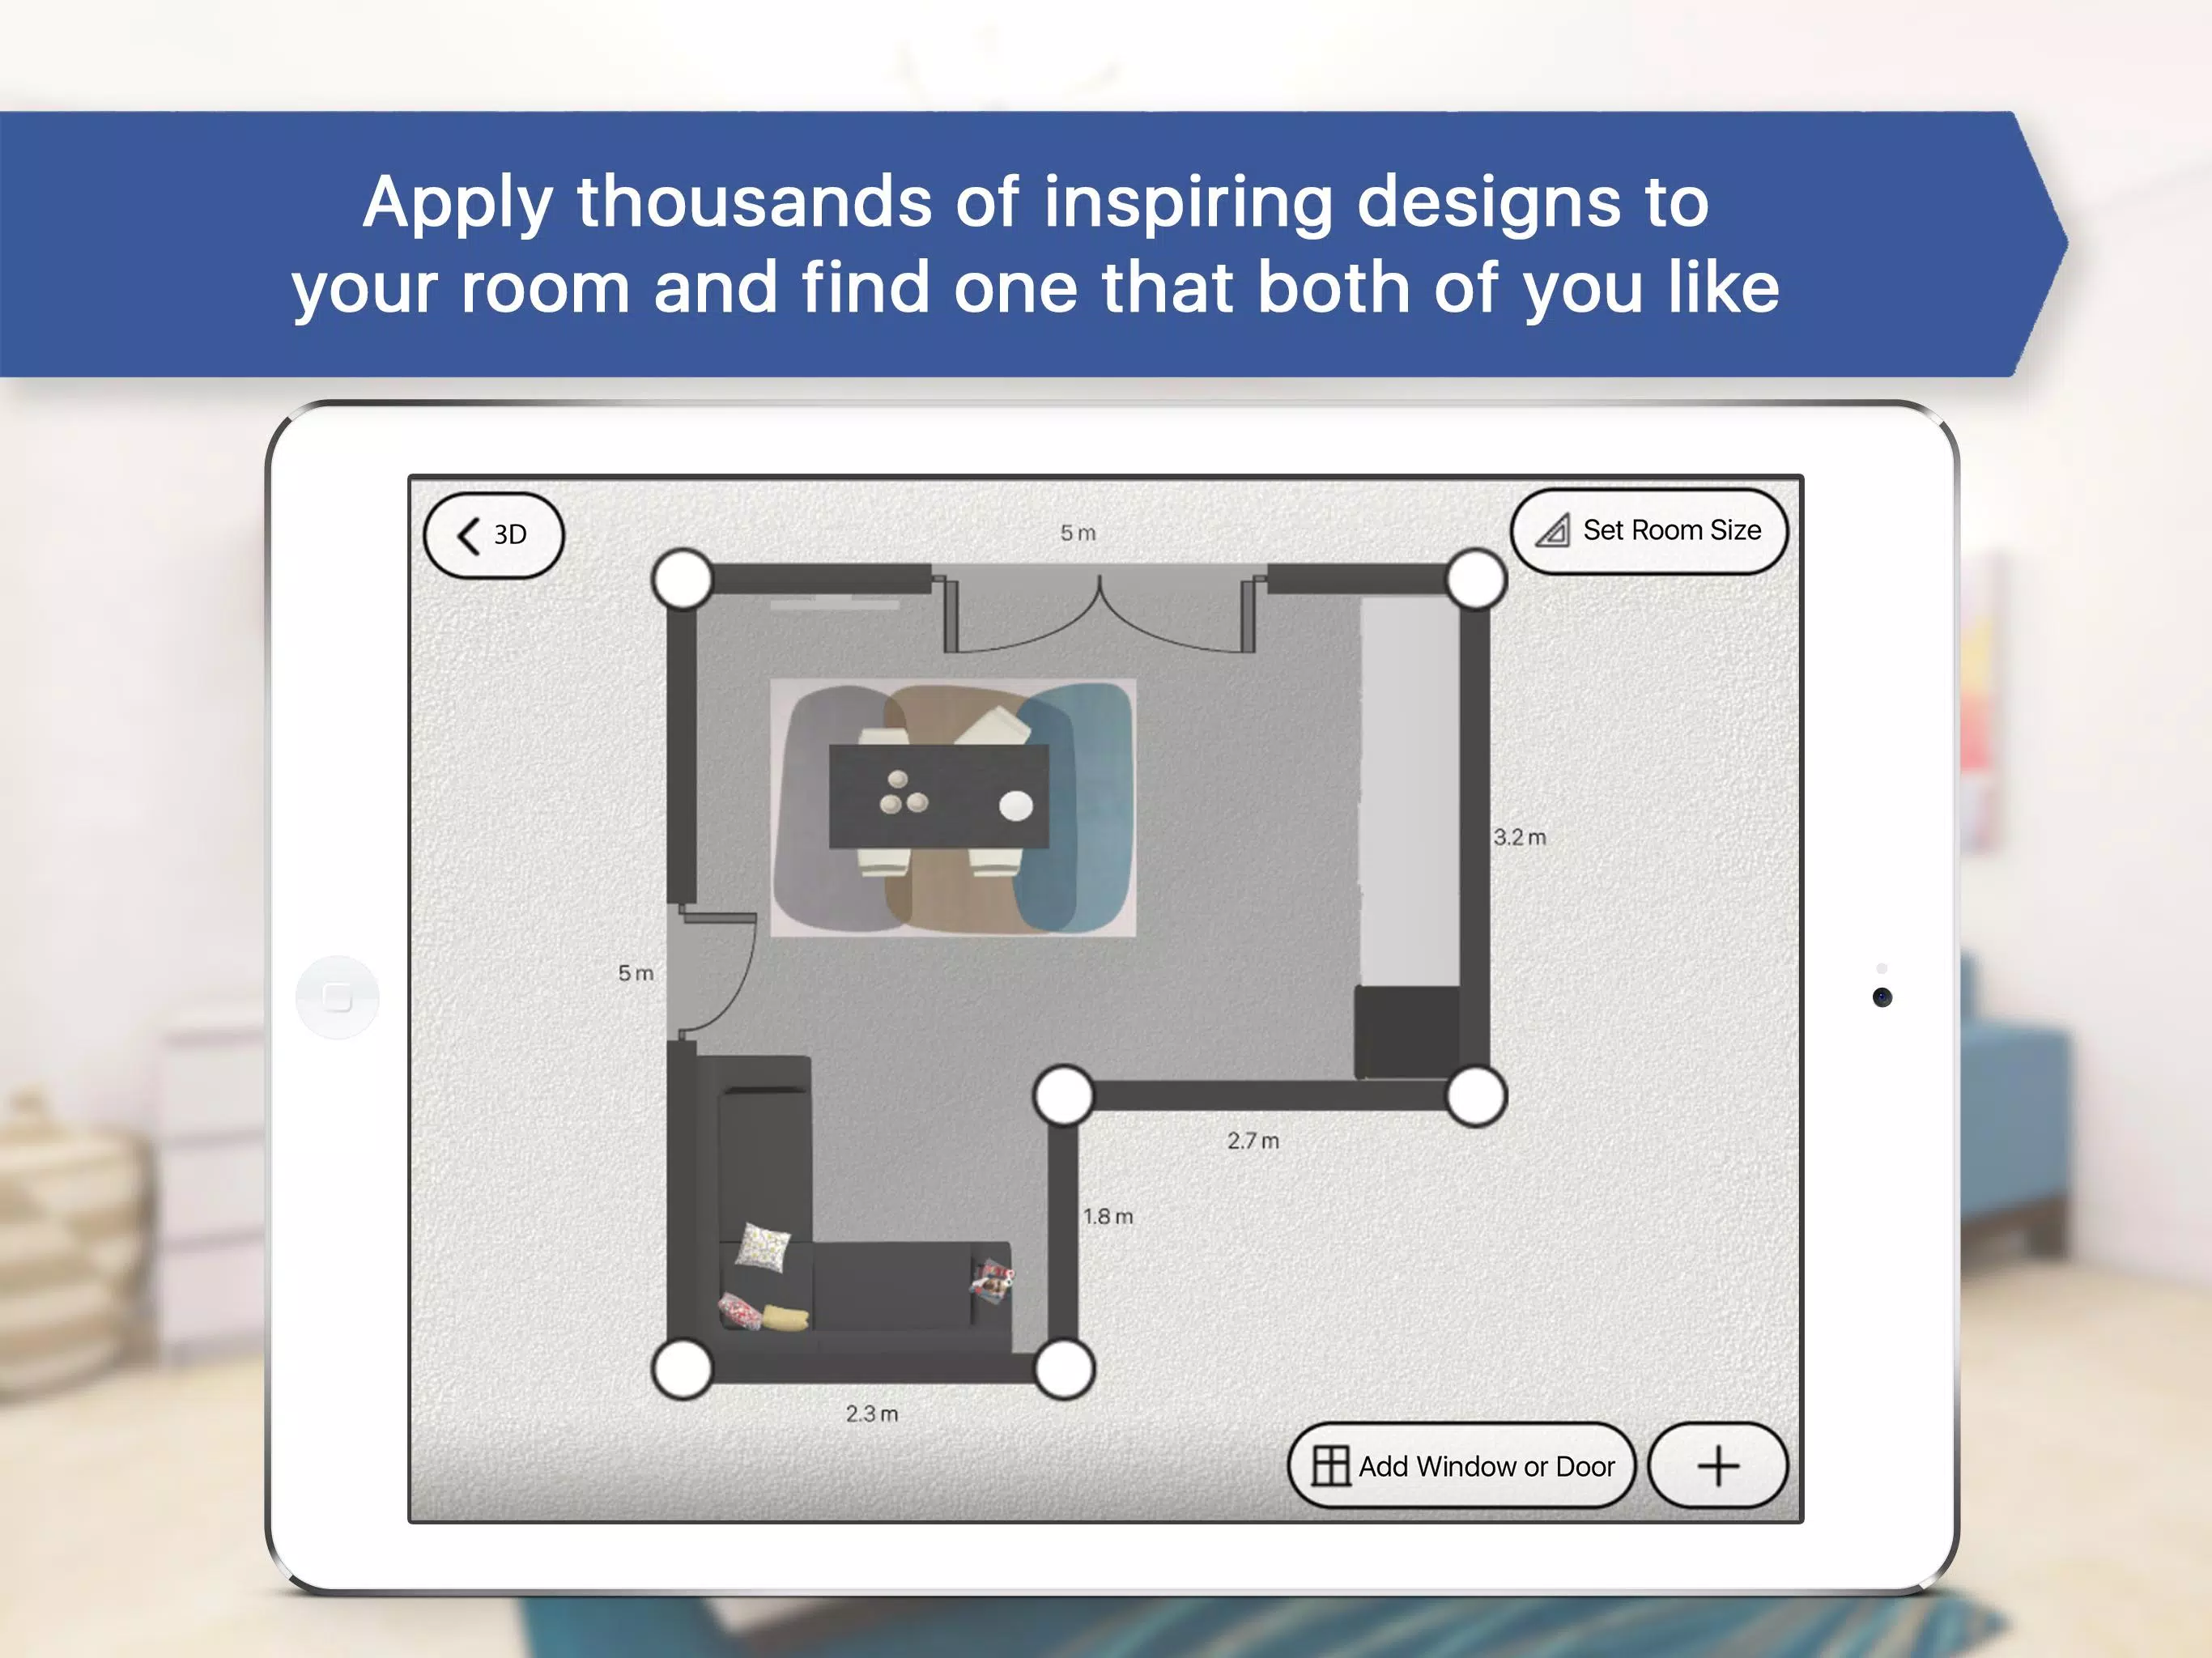 3D Bedroom for IKEA: Room Interior Design Planner for Android - APK Download